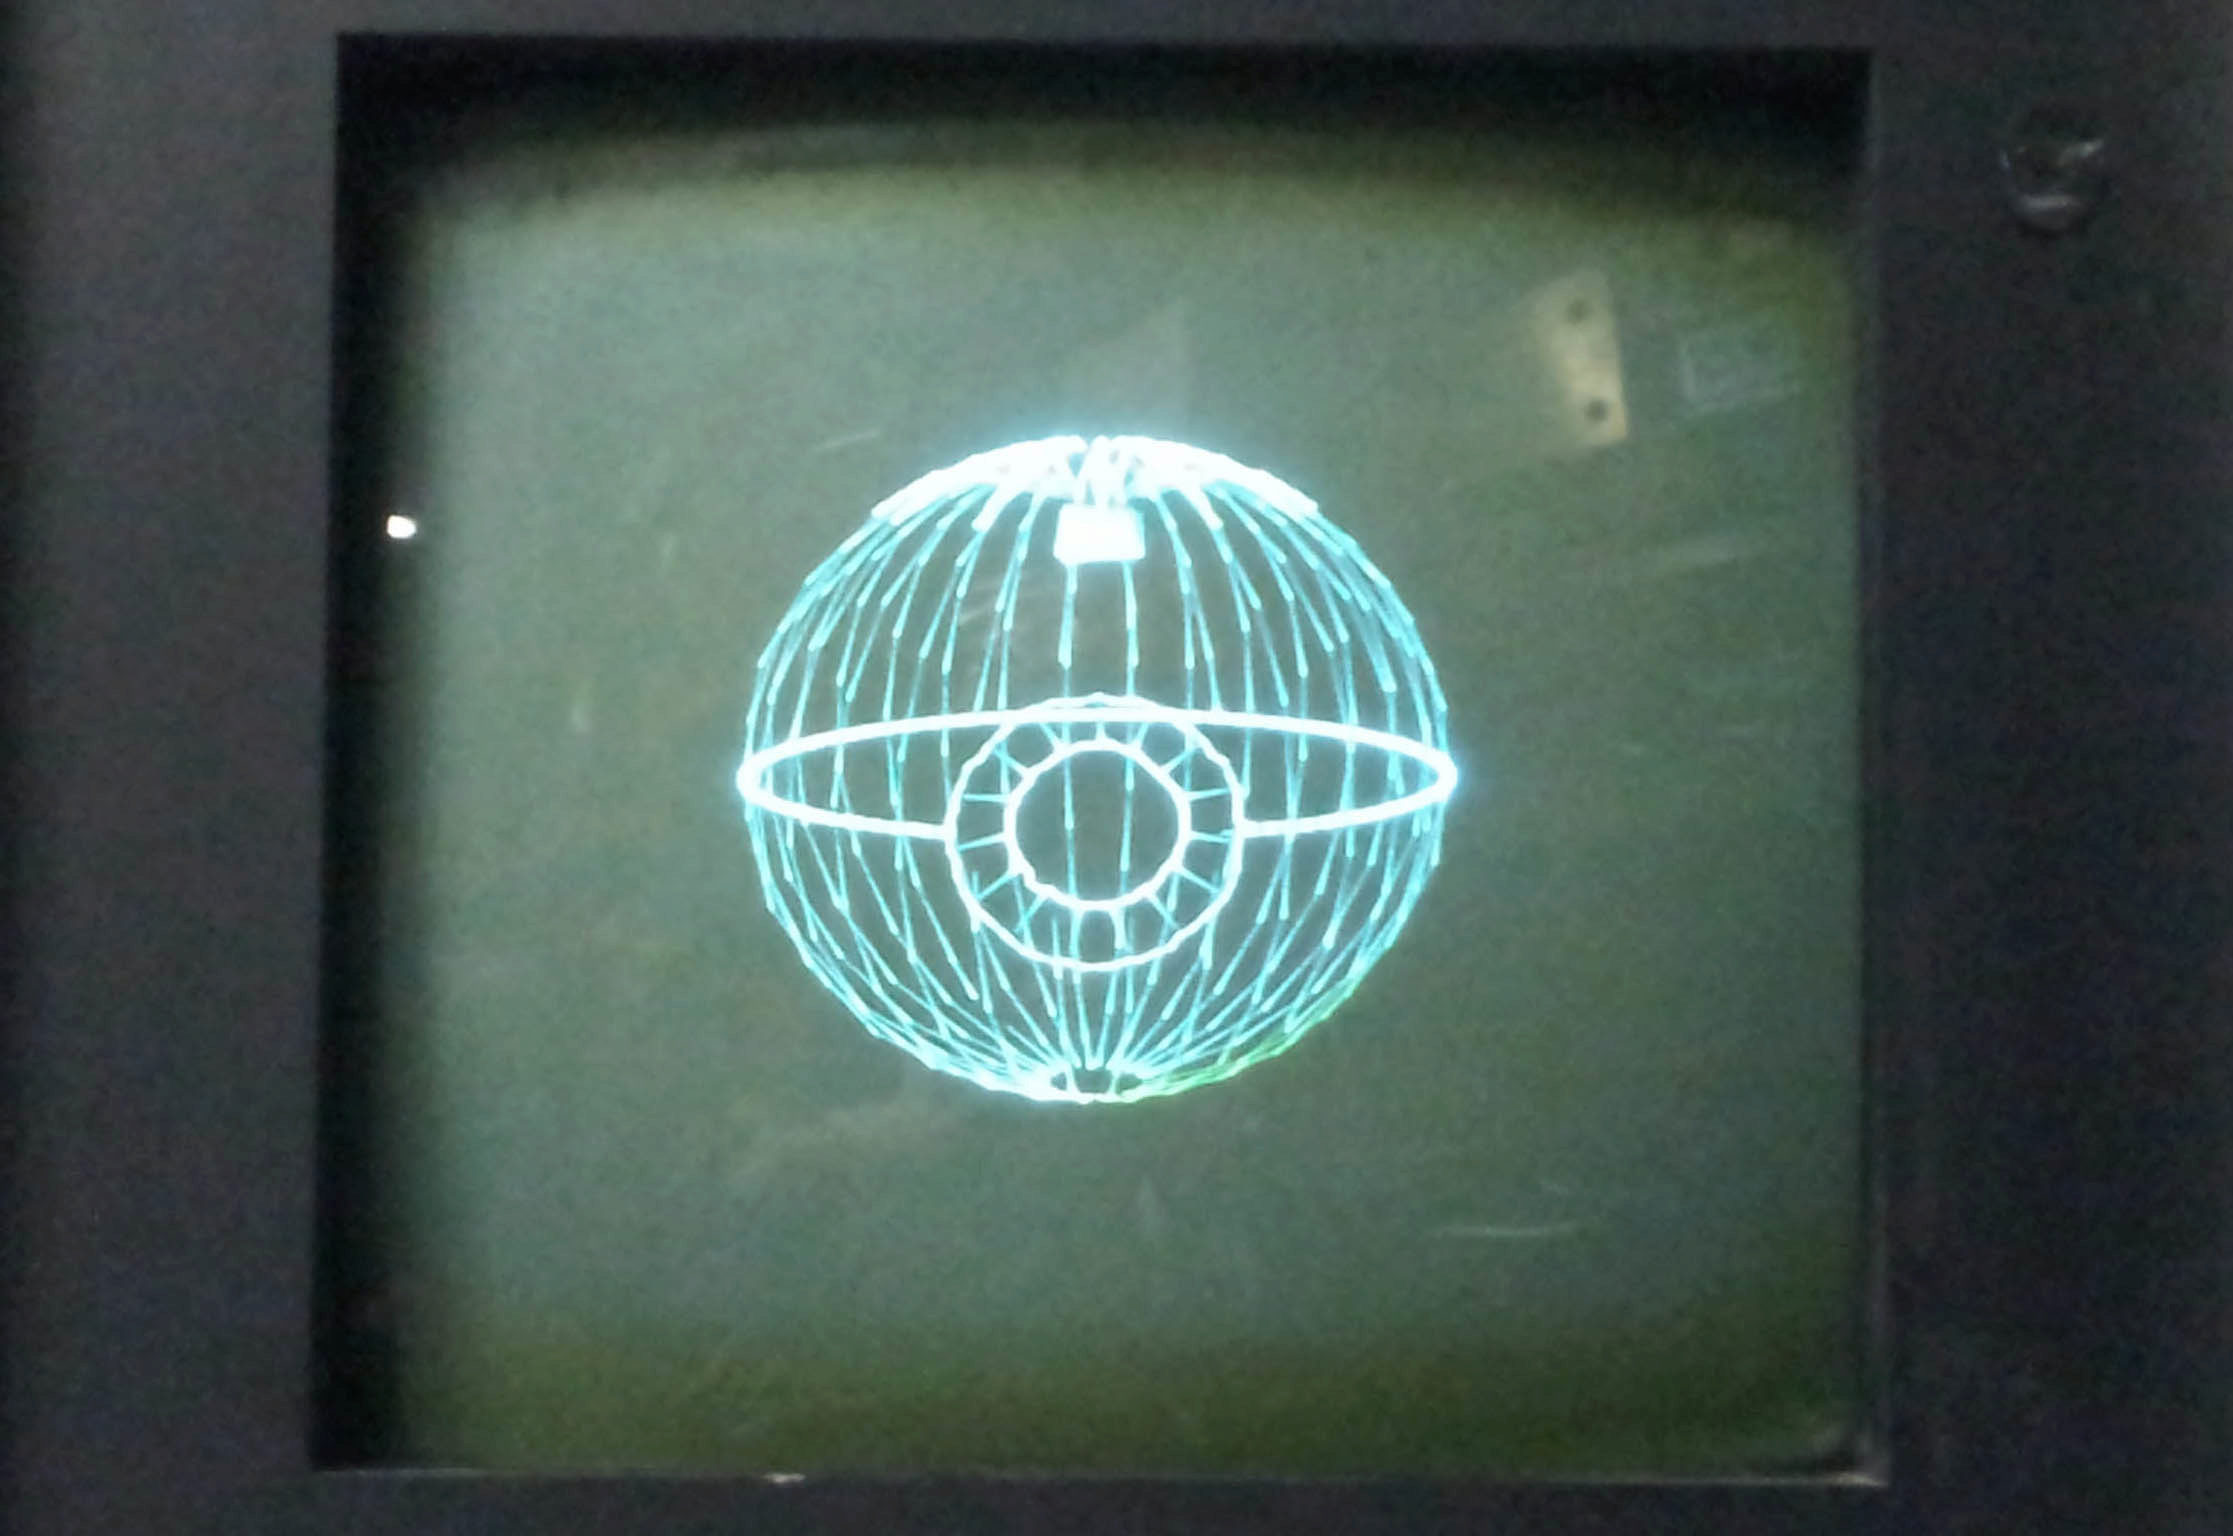 (c) 2013. The Vector General system used to create the Deathstar debriefing scene for the 1977 Star Wars film.